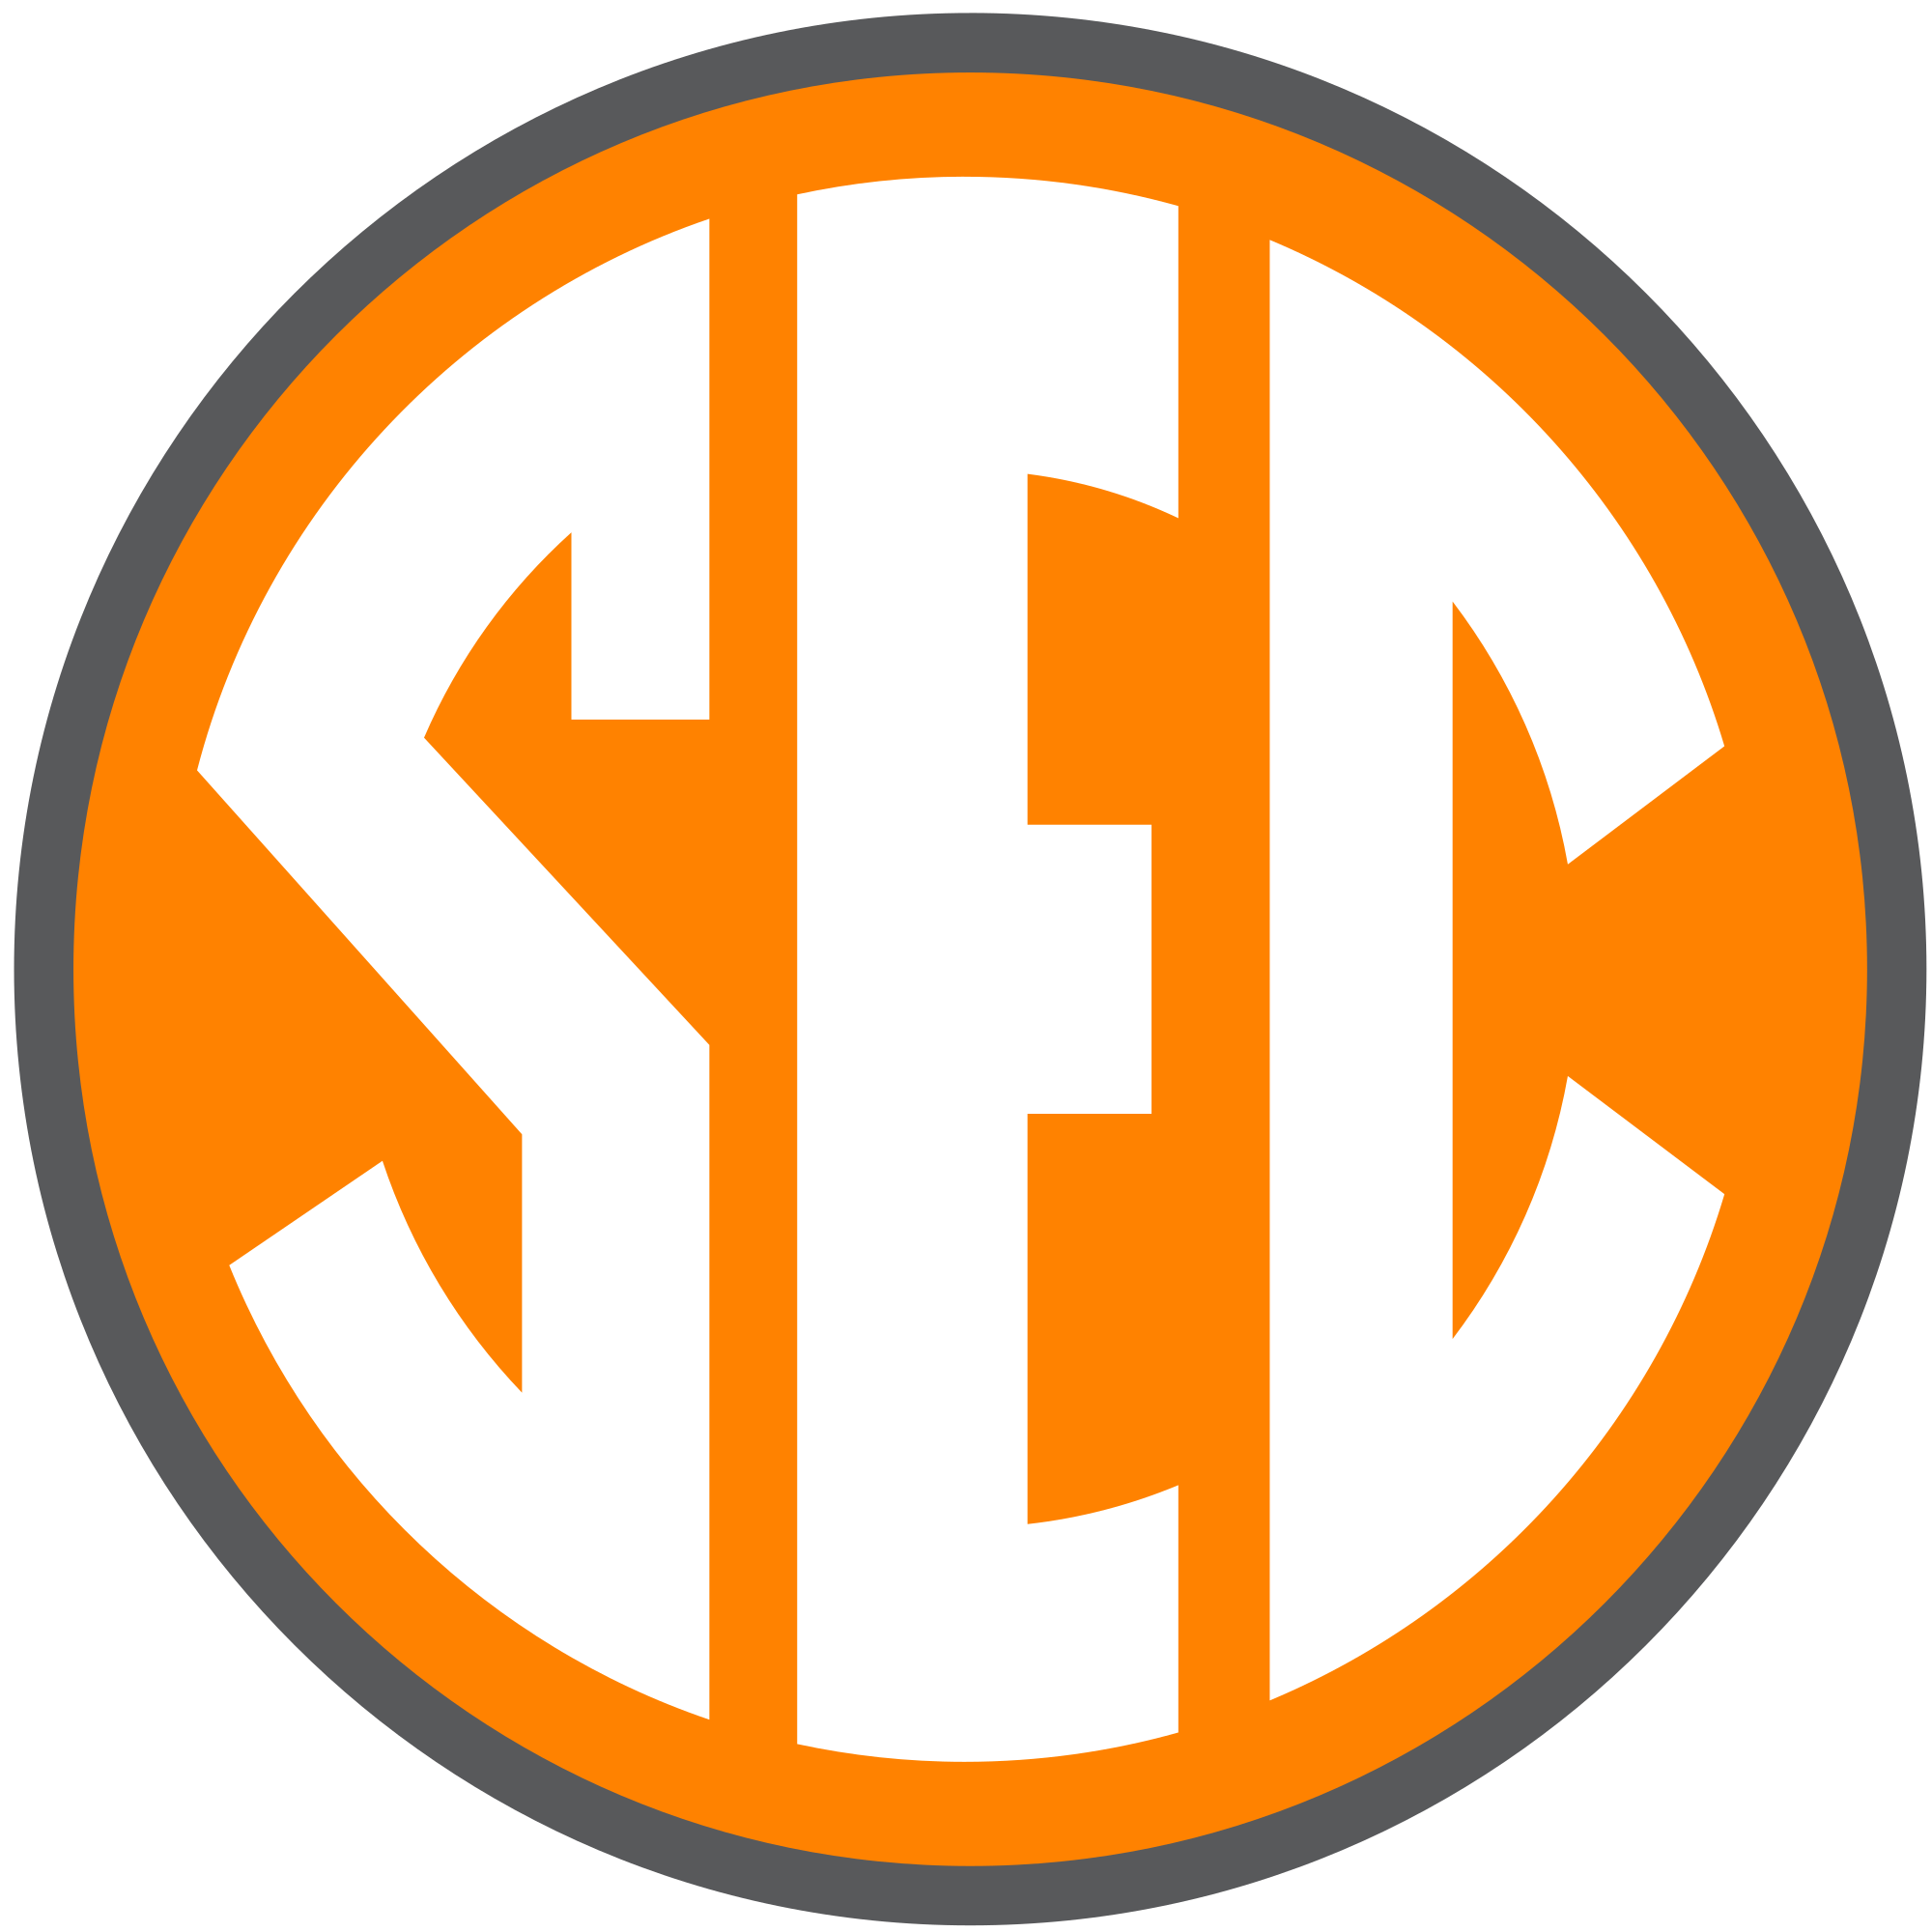 SEC Logo - File:SEC logo in Tennessee colors.svg - Wikimedia Commons